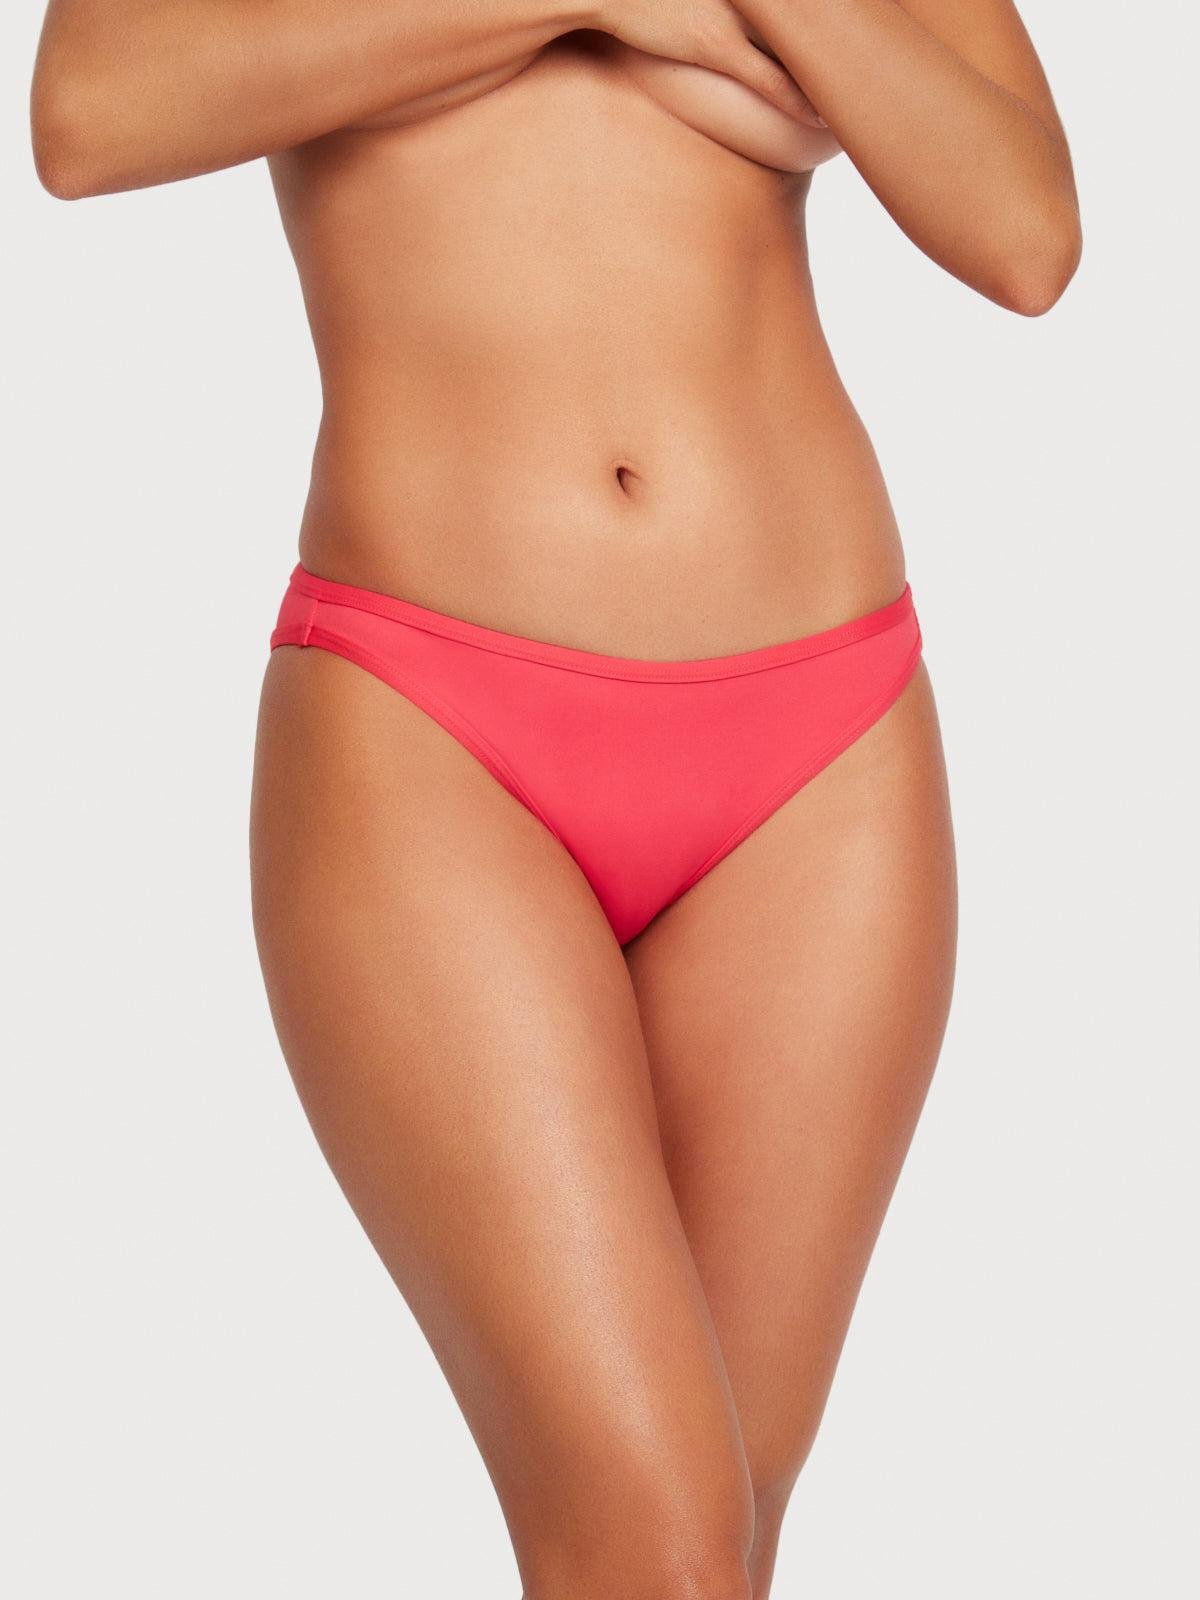 Classic Ruched Back Bikini Bottom in Geranium by FREDERICK'S OF HOLLYWOOD